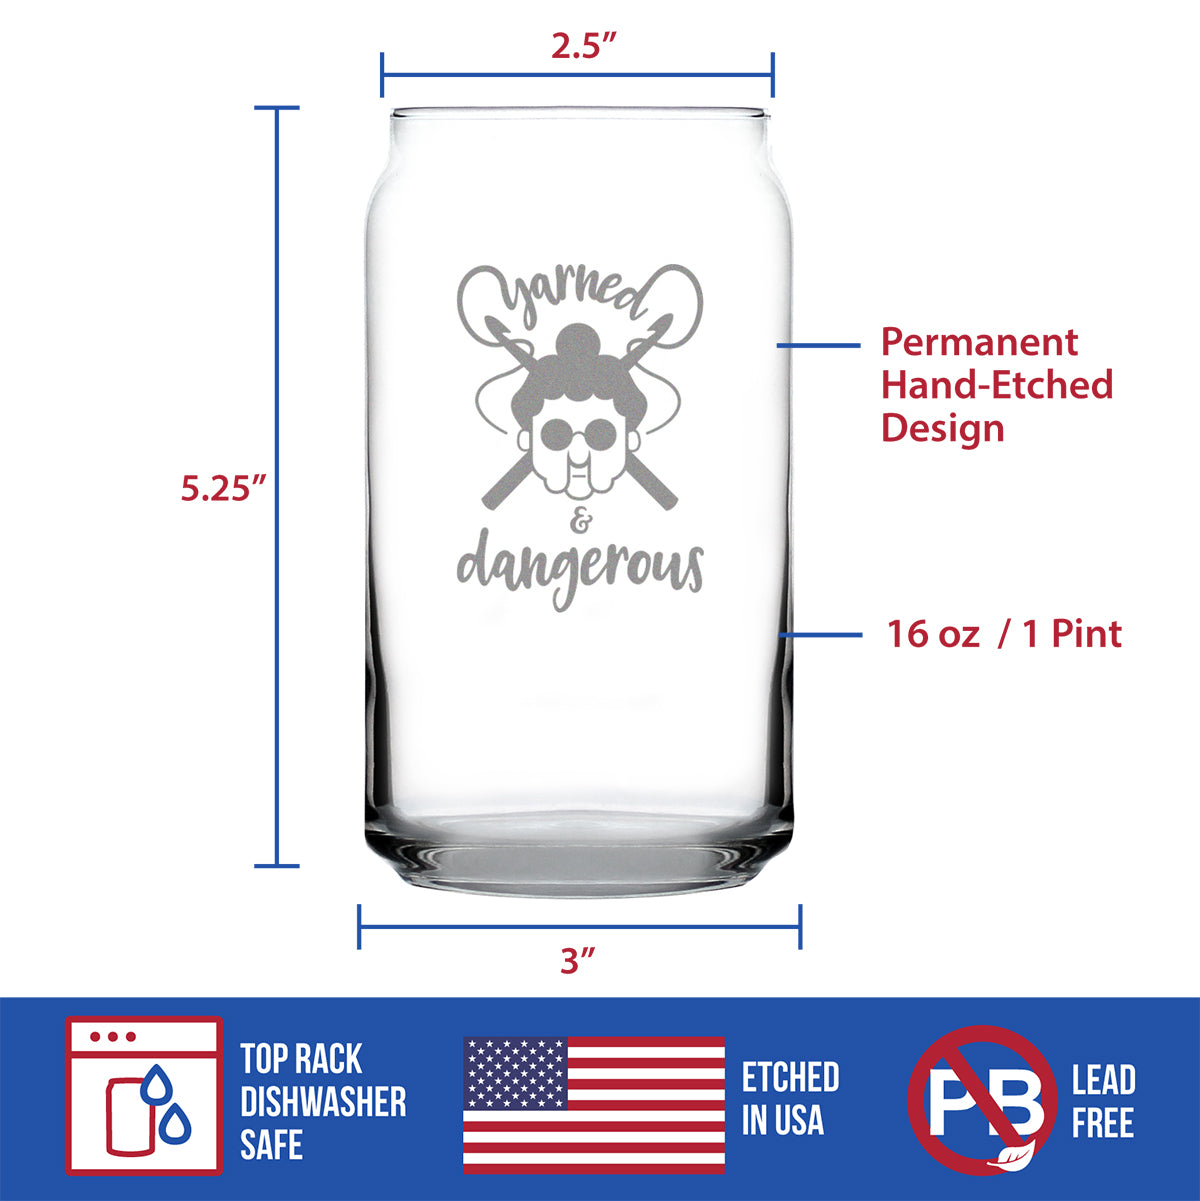 Yarned &amp; Dangerous - 16 Ounce Beer Can Pint Glass